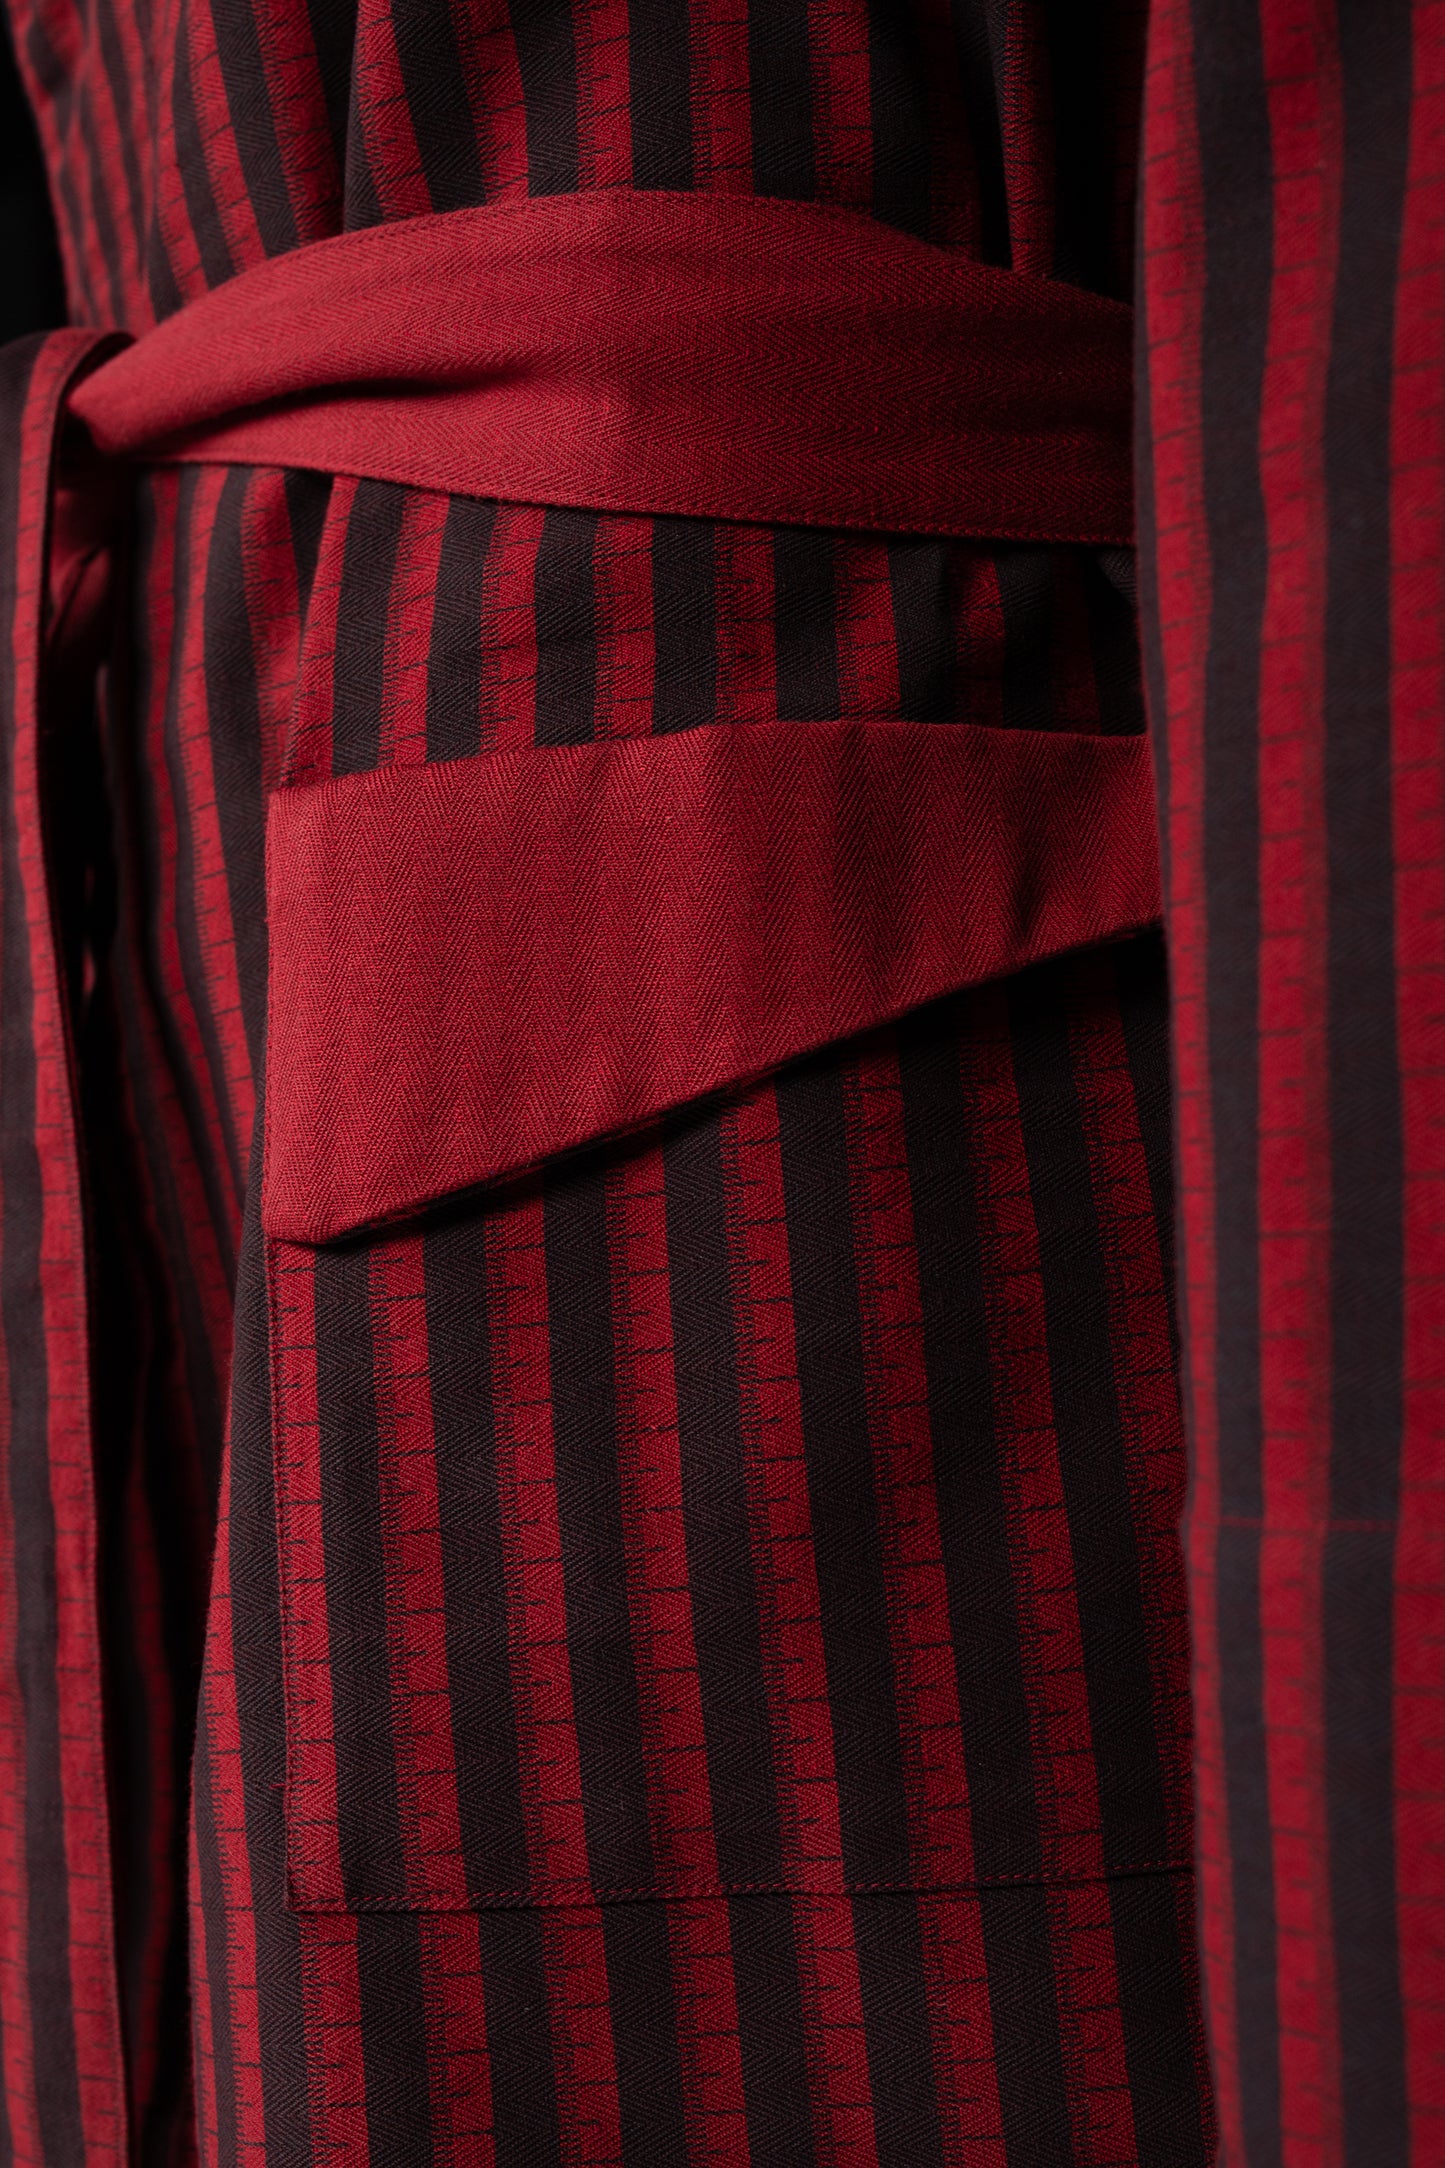 SMOKING-JACKET RED-Black-black with black piping 100% COTTON Herringbone-Thick, Brushed-inside Broad-Stripes screen-print